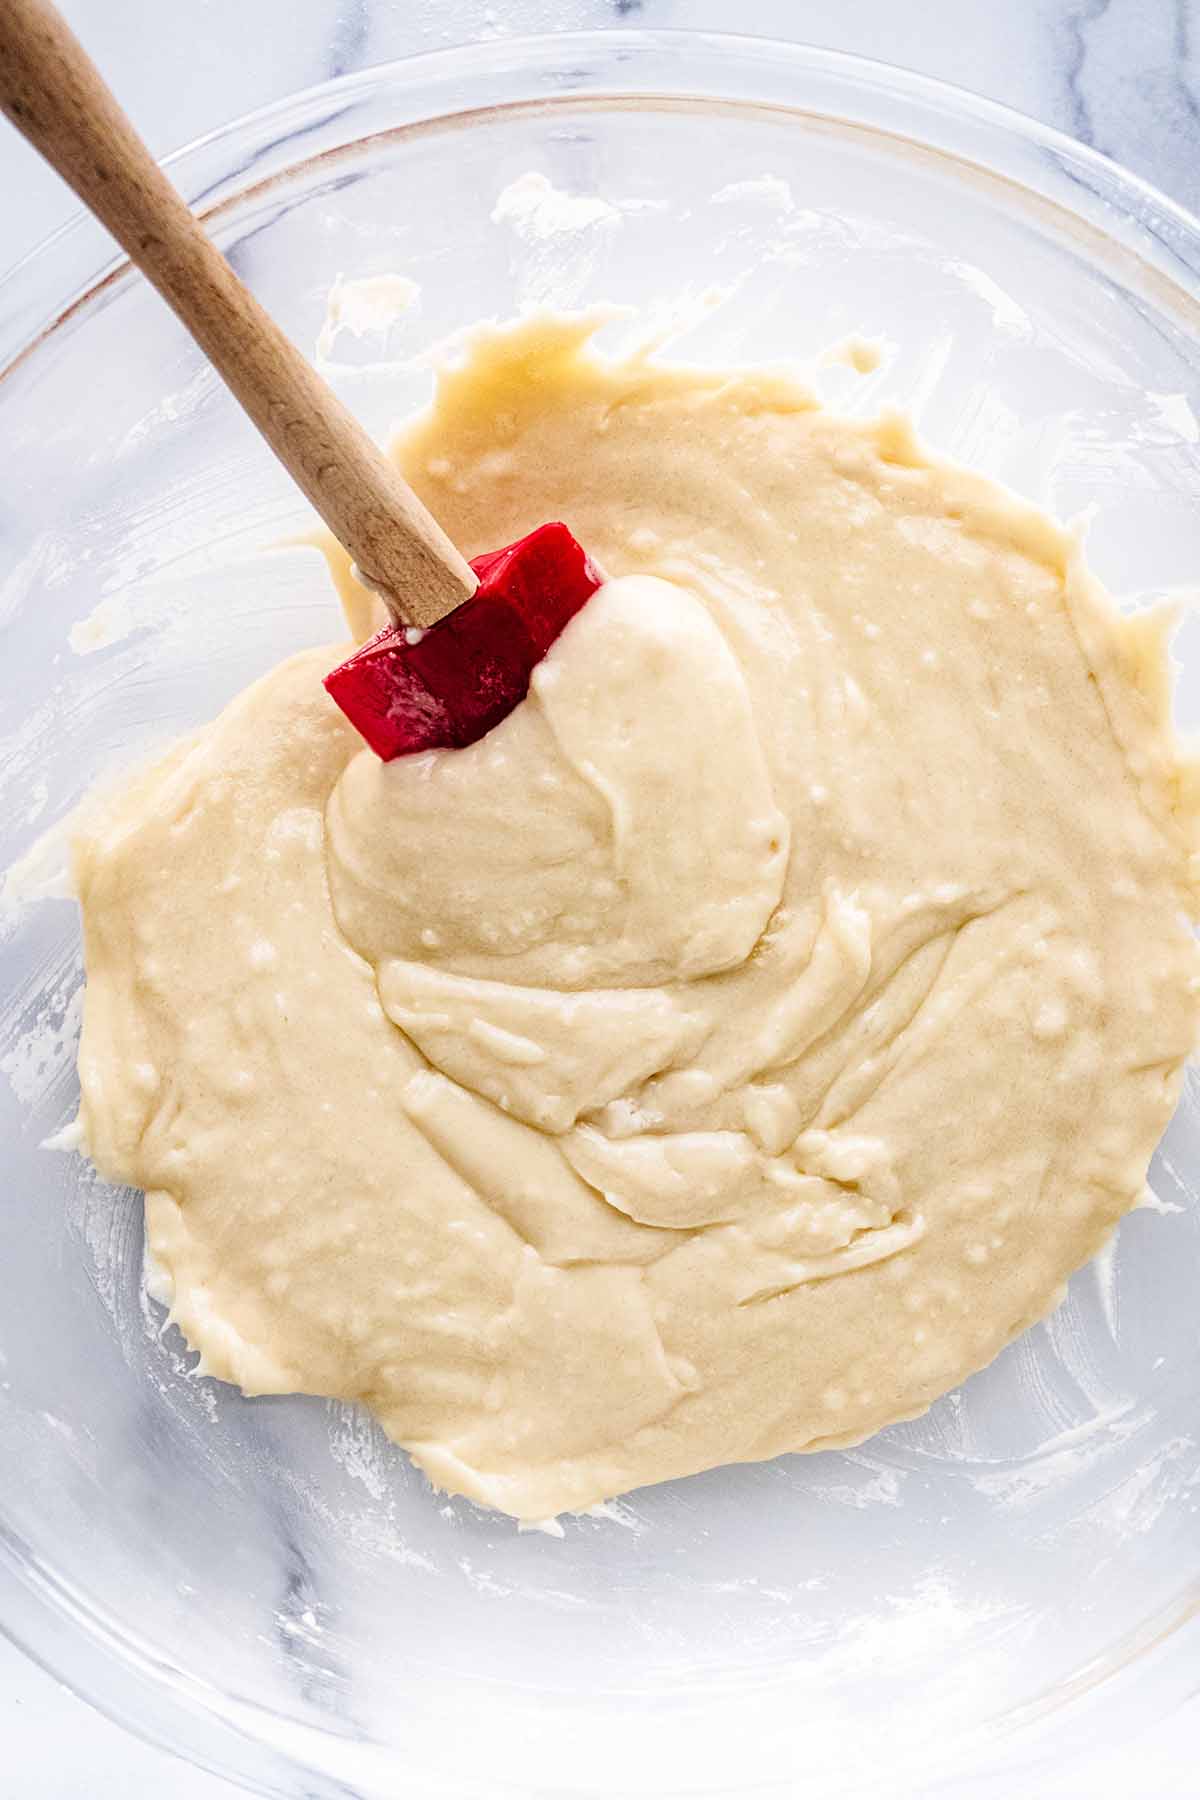 Overhead view of muffin batter in a large glass bowl with a red rubber spatula